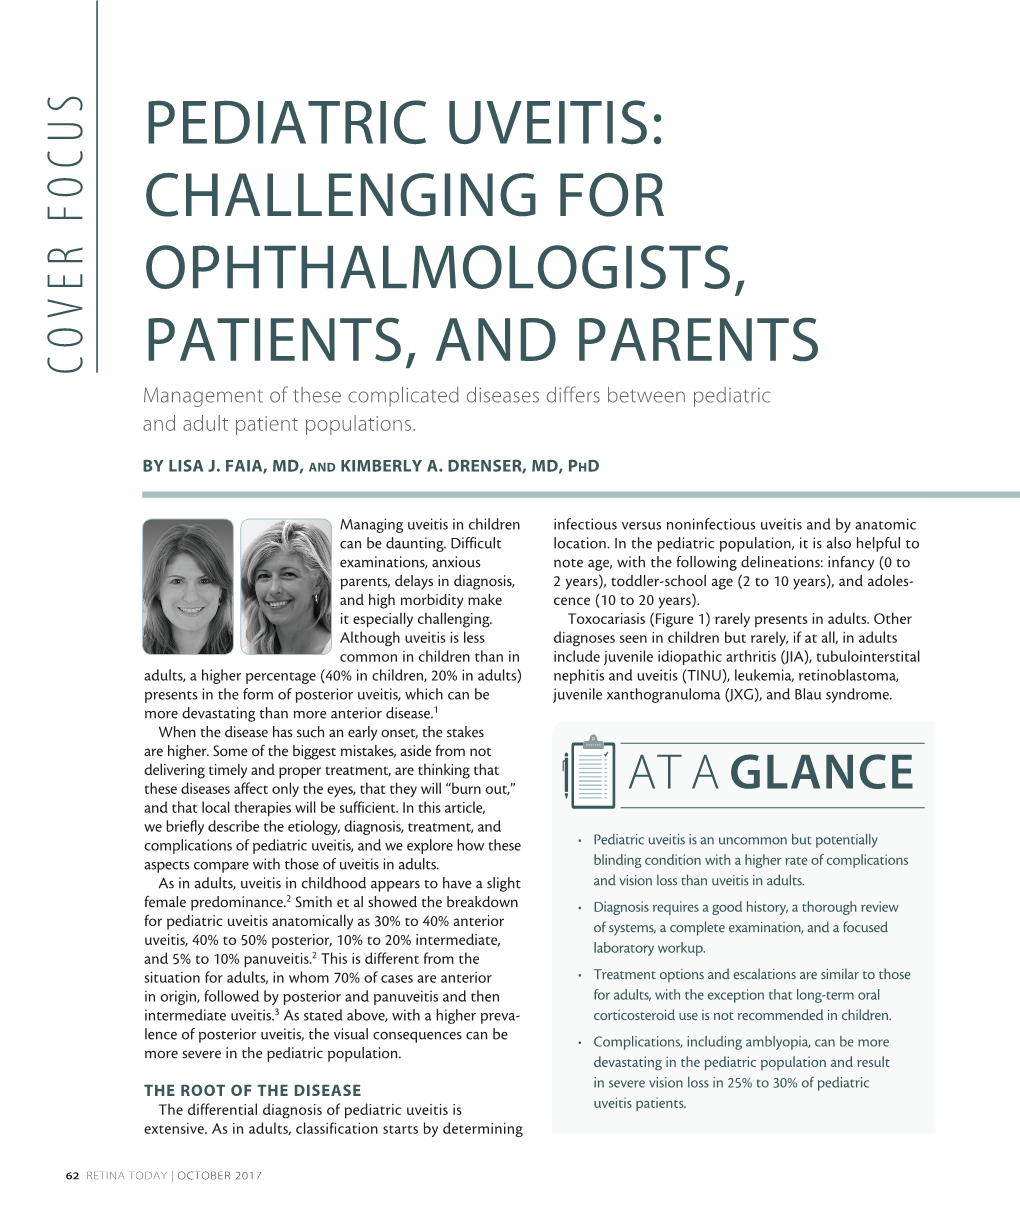 Pediatric Uveitis: Challenging for Ophthalmologists